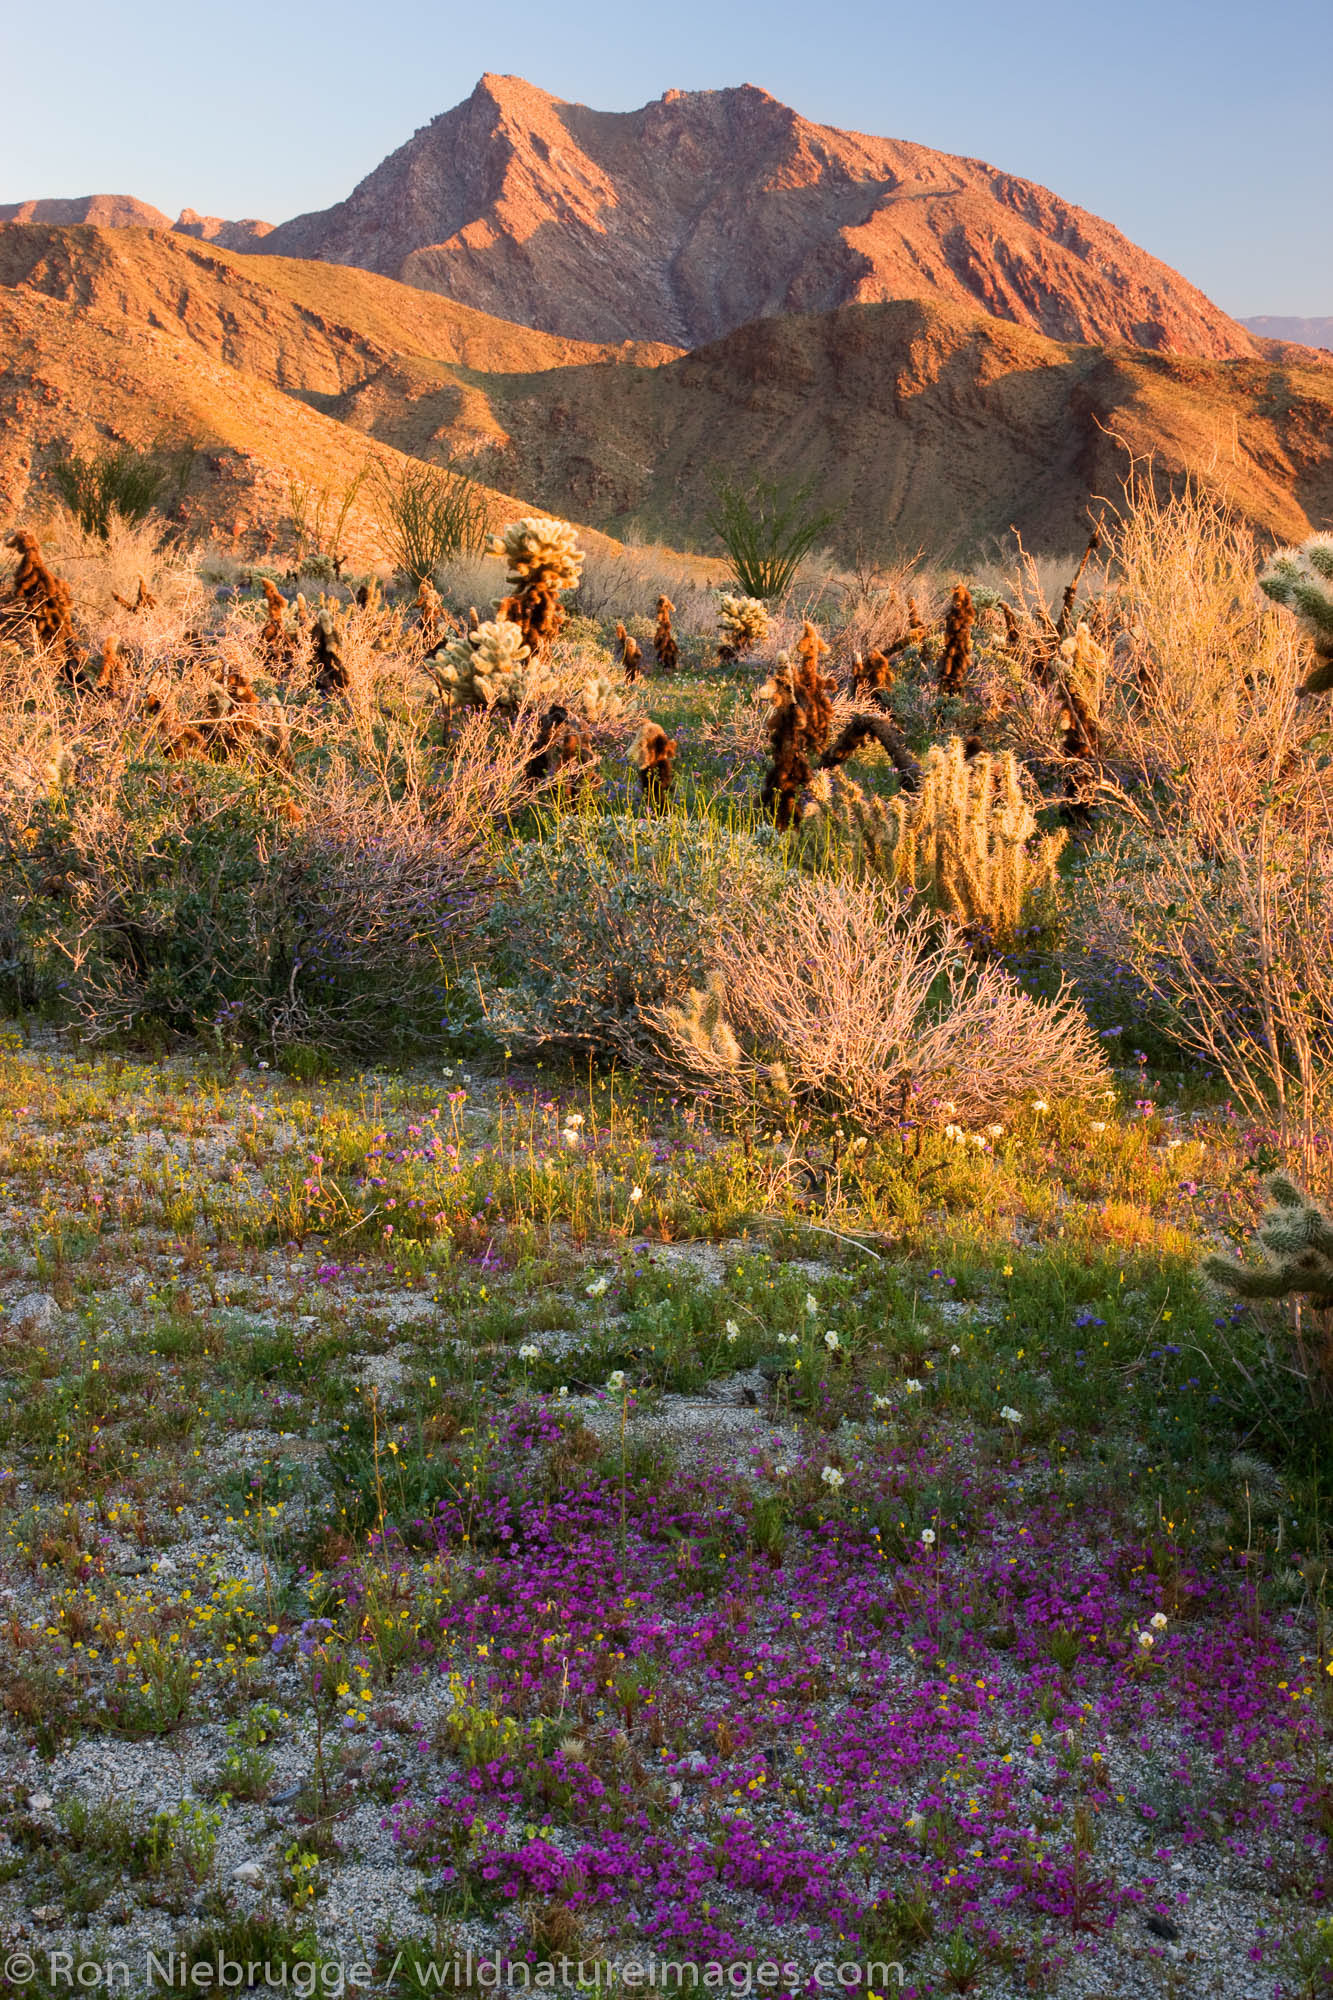 Wildflowers in Hellhole Canyon, Anza-Borrego Desert State Park, California.